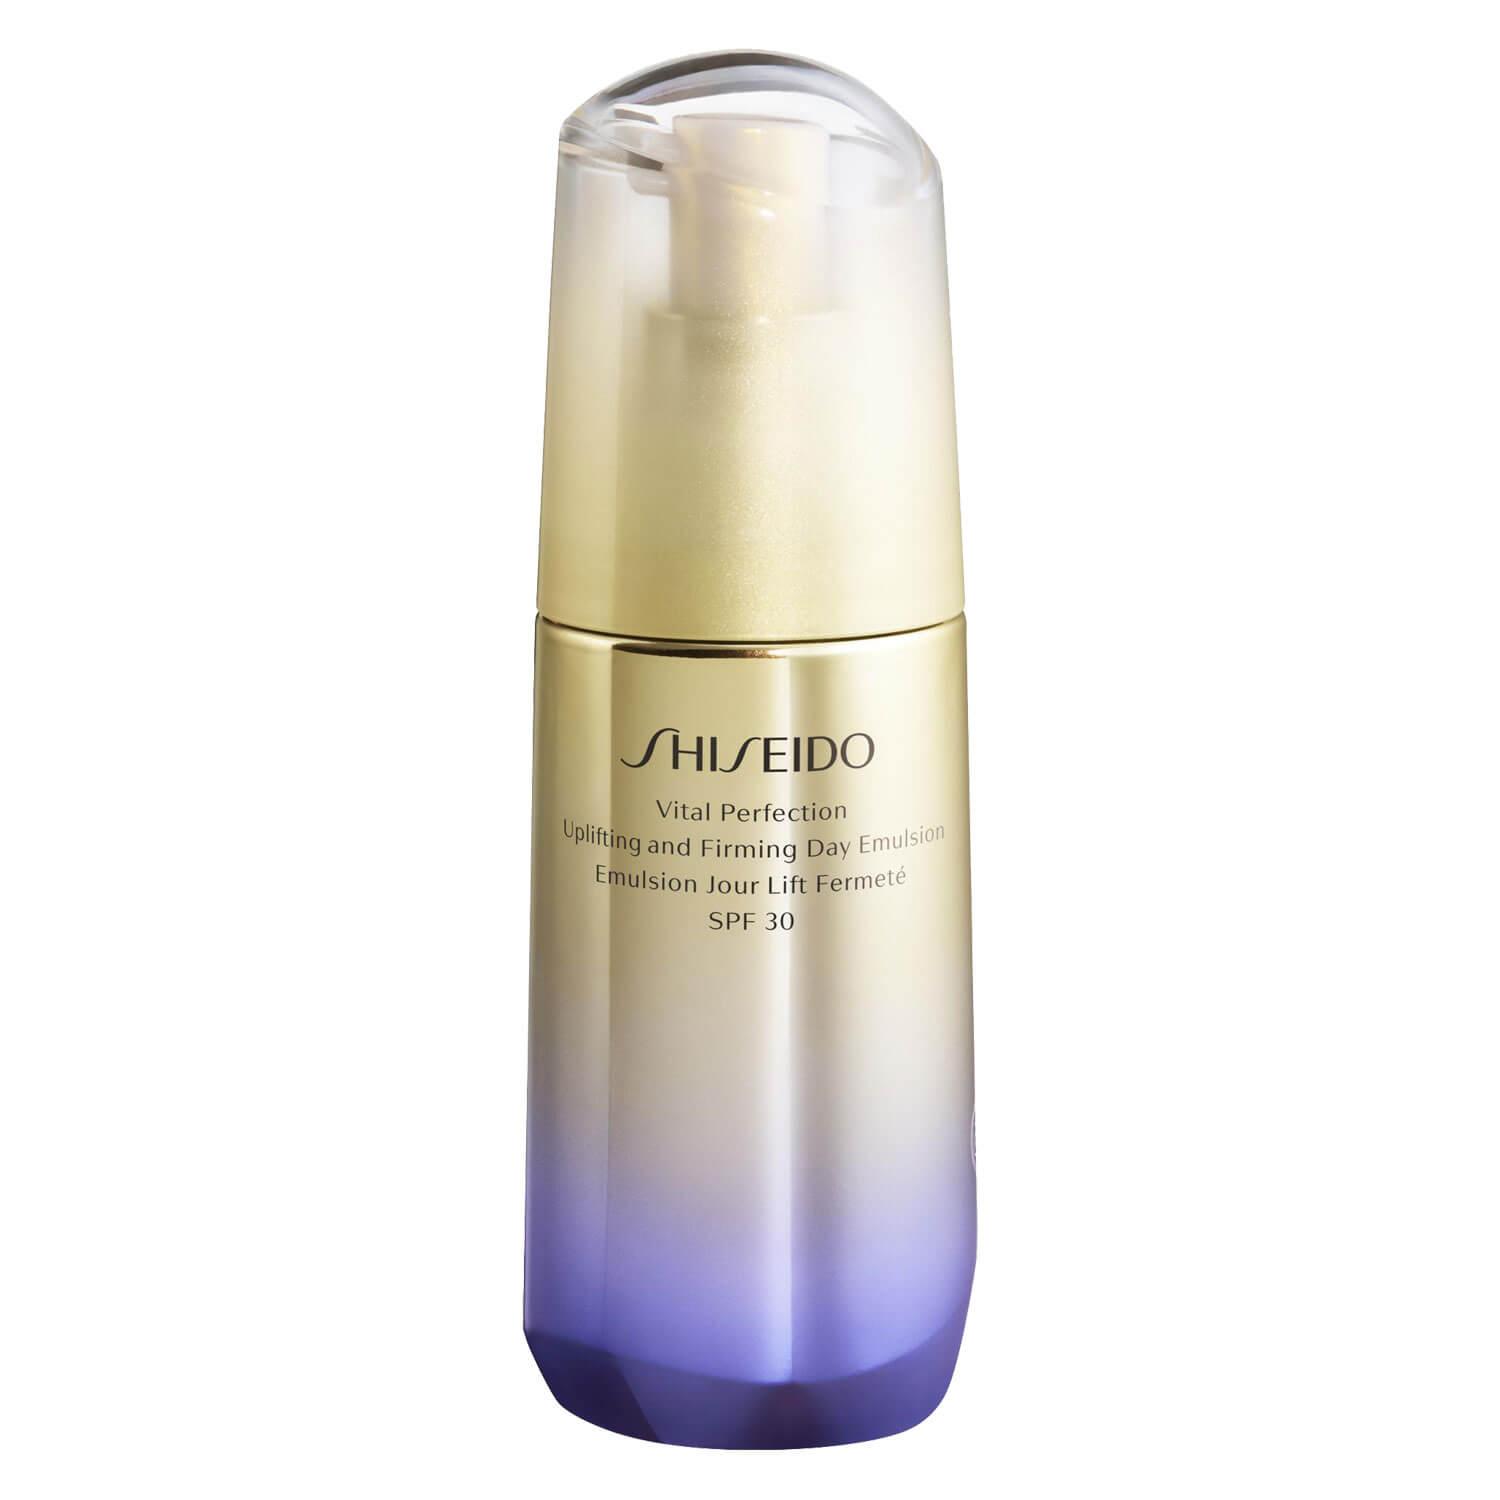 Vital Perfection - Uplifting and Firming Day Emulsion SPF30